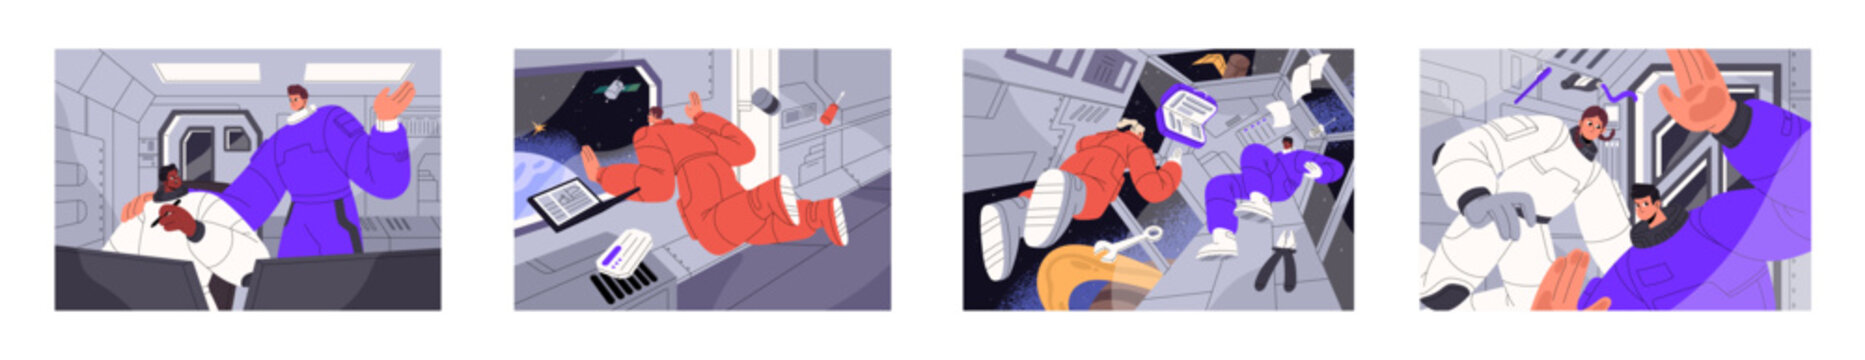 Astronauts inside spaceship. Cosmonauts, men and women travel in space ship, cosmos shuttle interior. Astronomy crew in spacesuits floating in weightlessness, orbit flight. Flat vector illustrations